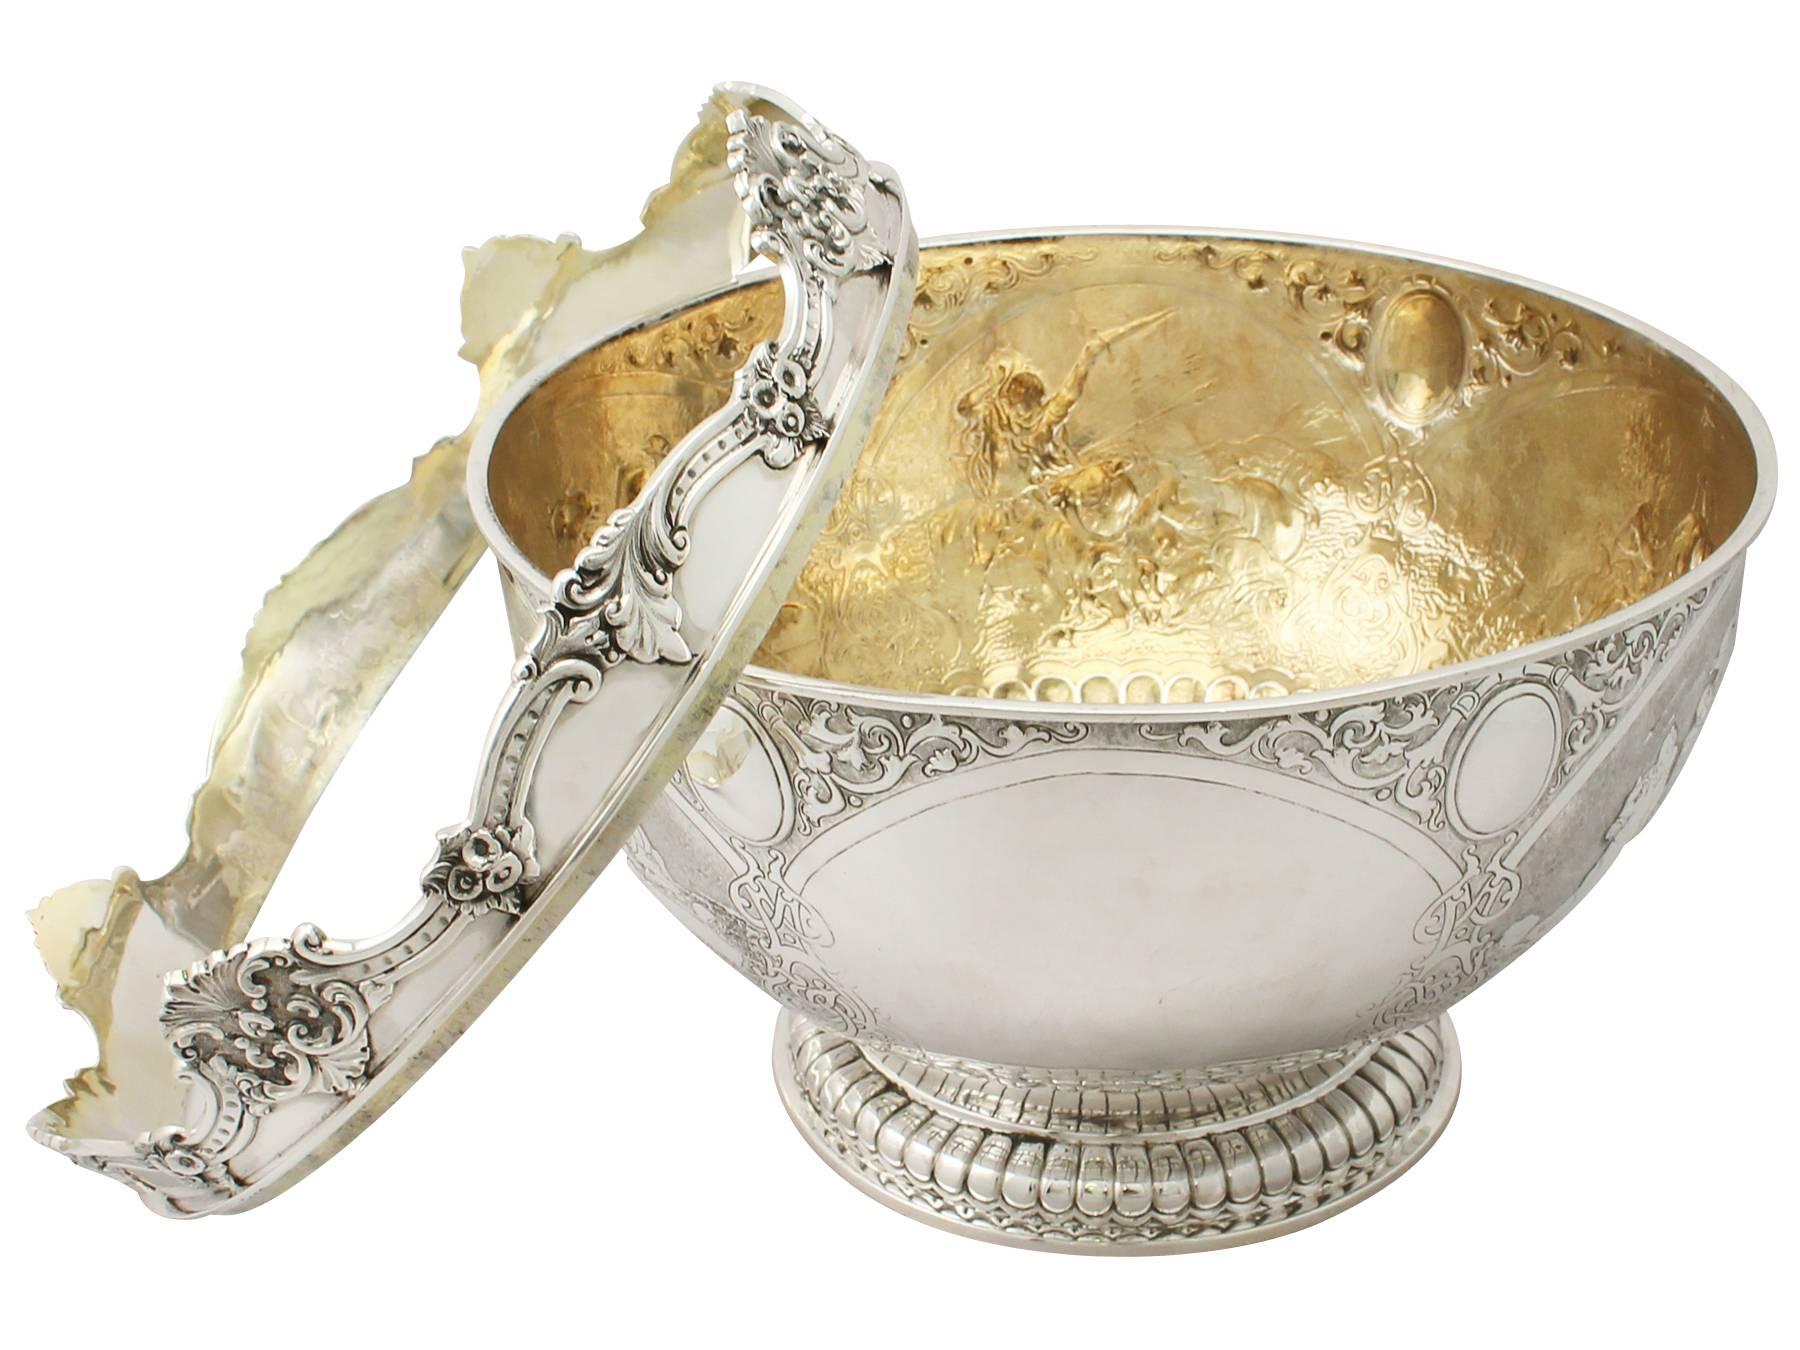 Late 19th Century Sterling Silver Monteith Bowl/Centerpiece, Antique Victorian